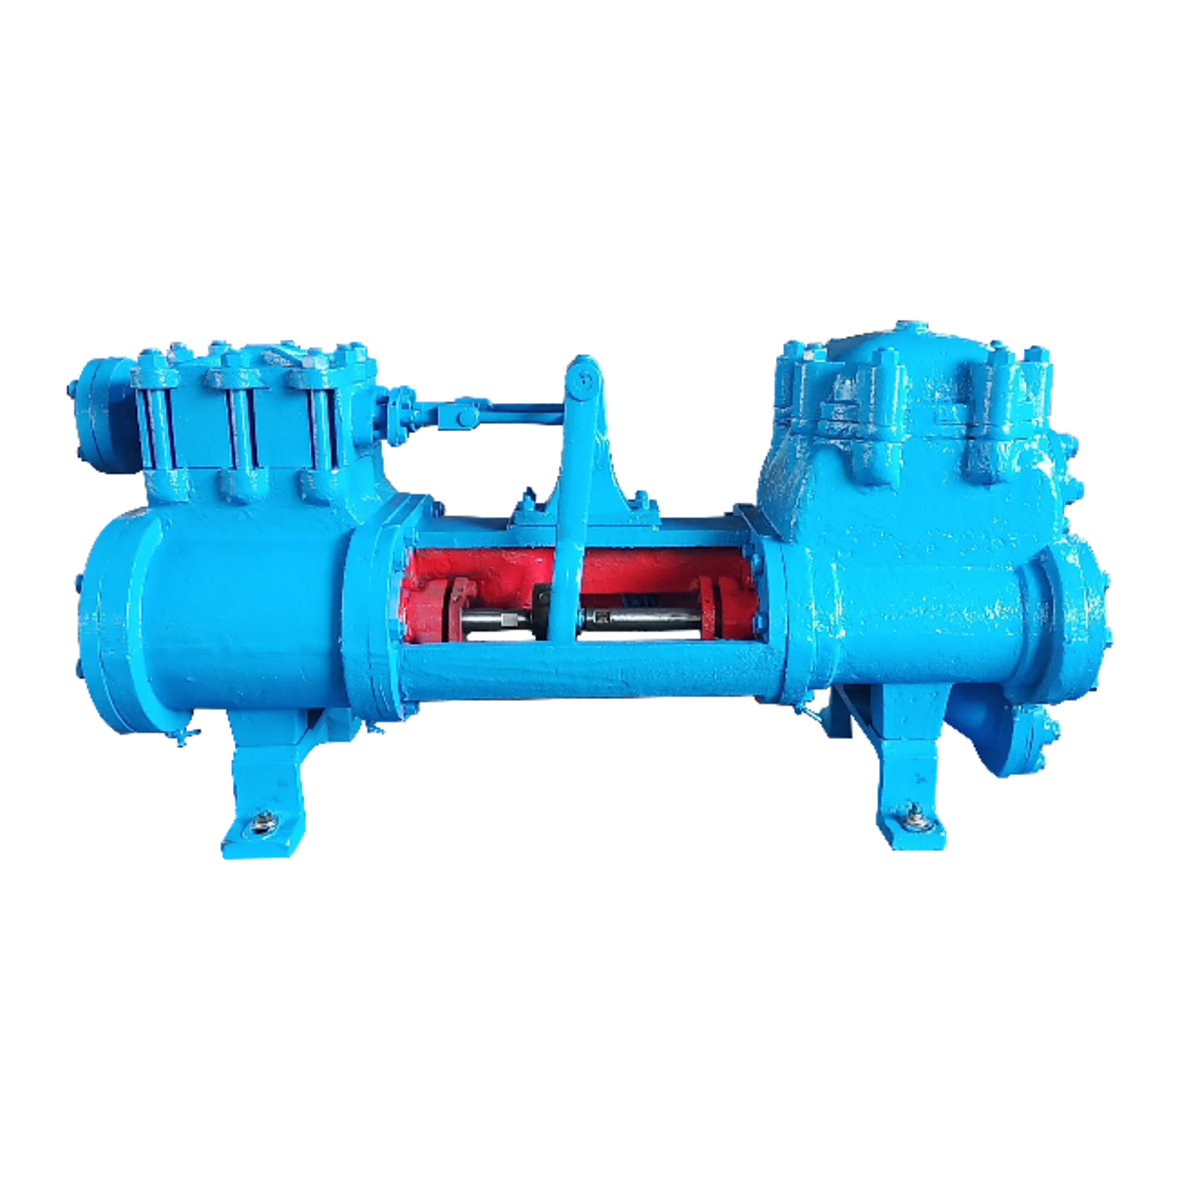 What is Steam Reciprocating Pump?